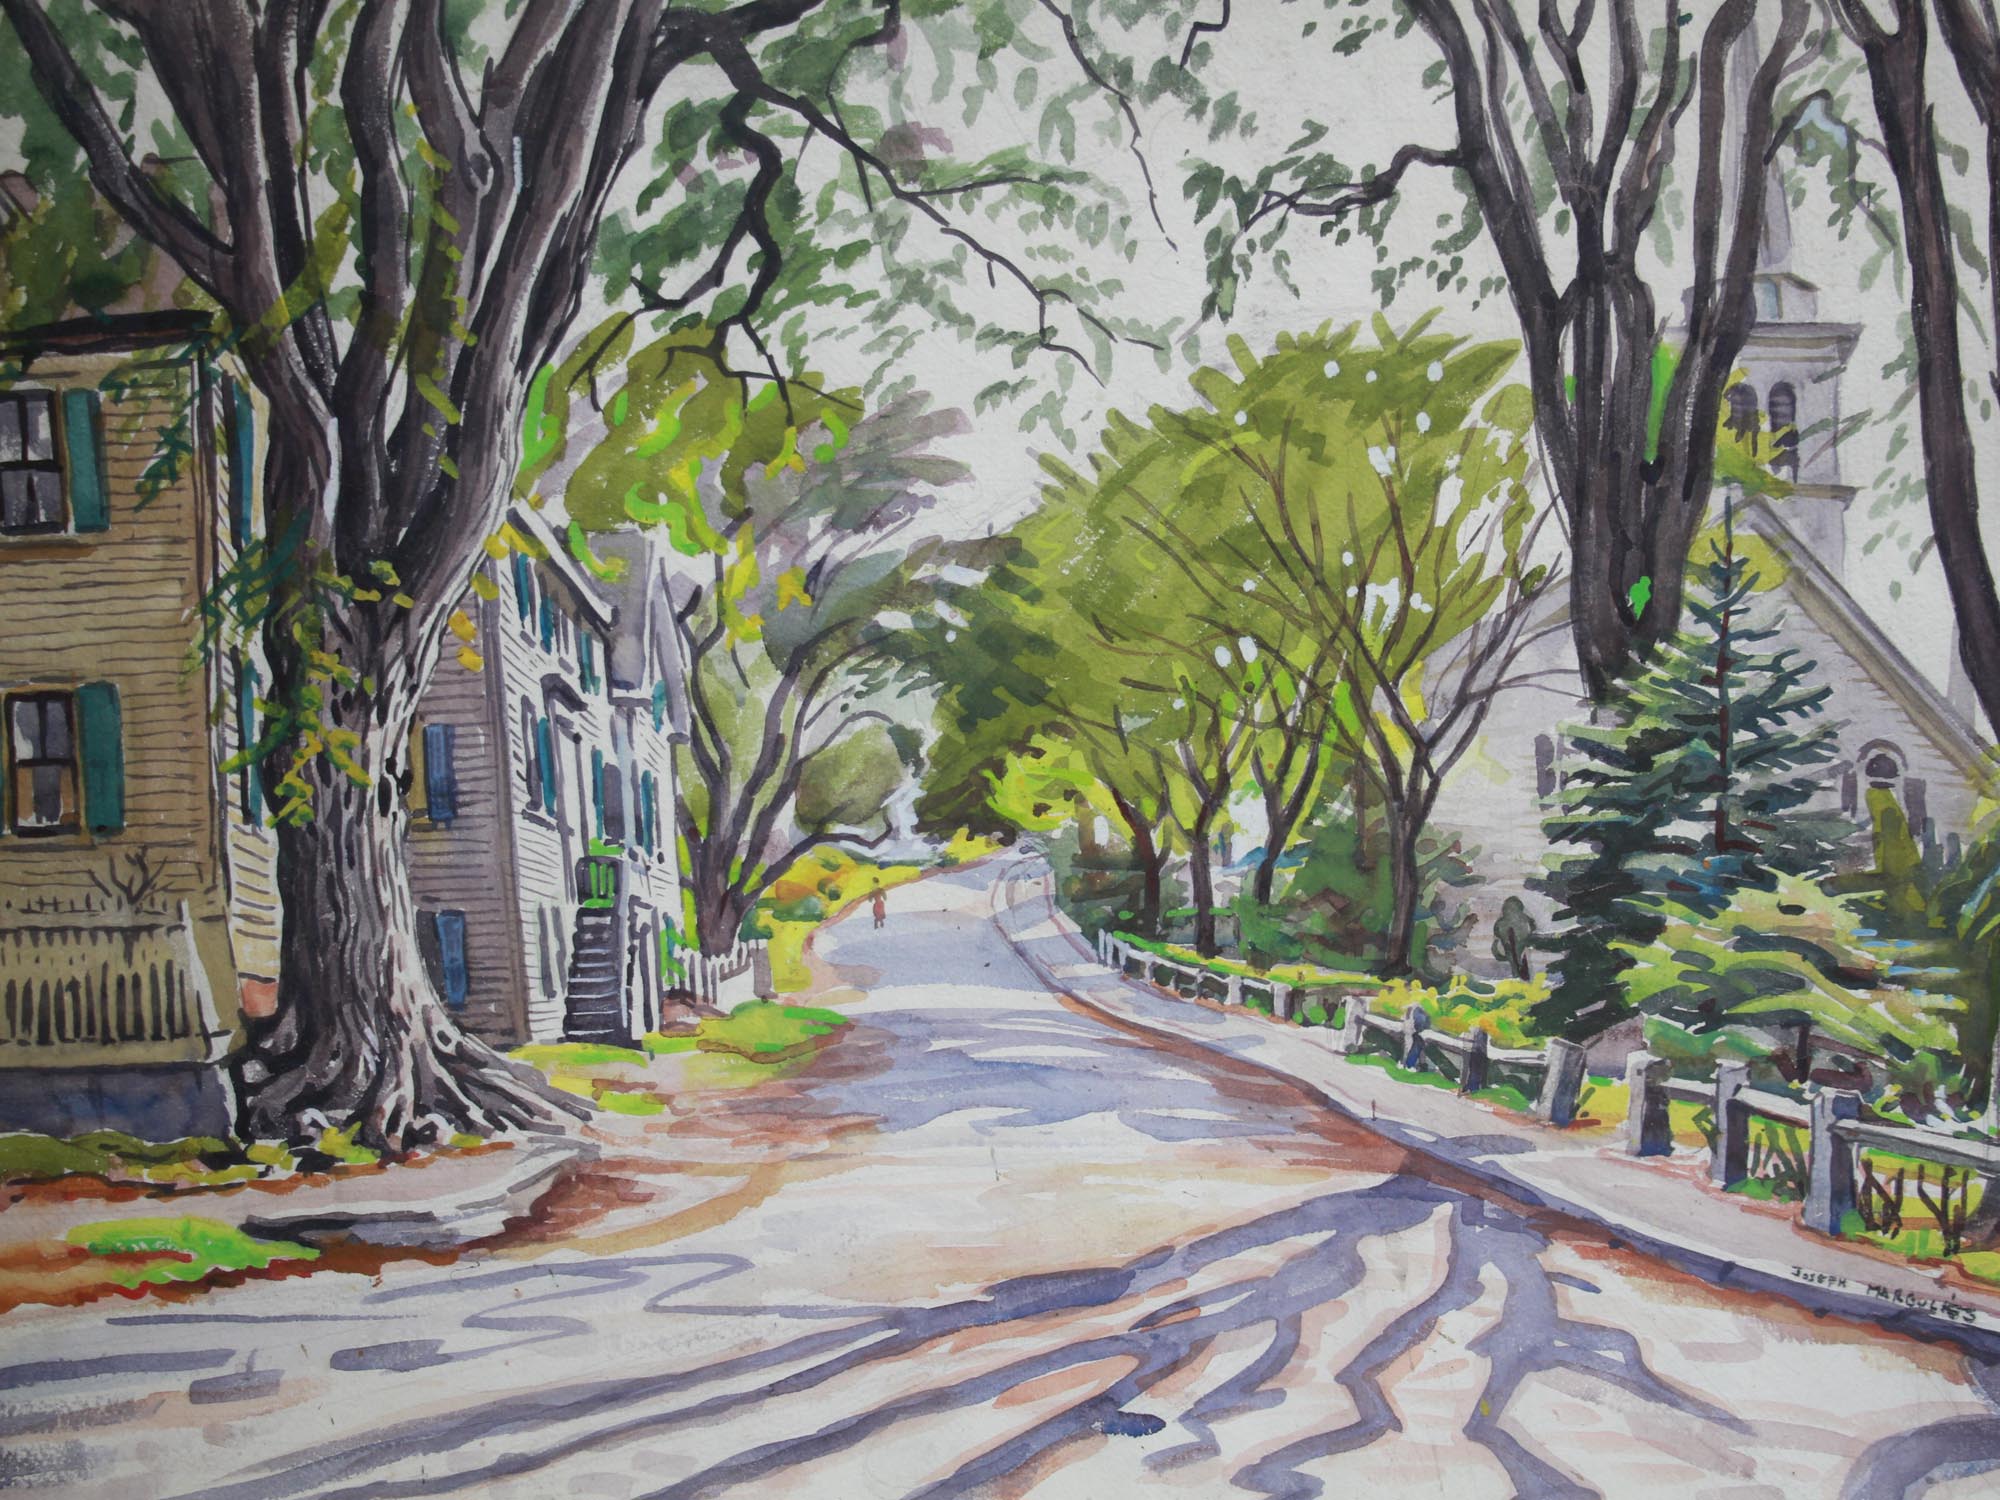 AMERICAN WATERCOLOR PAINTING BY JOSEPH MARGULIES PIC-1